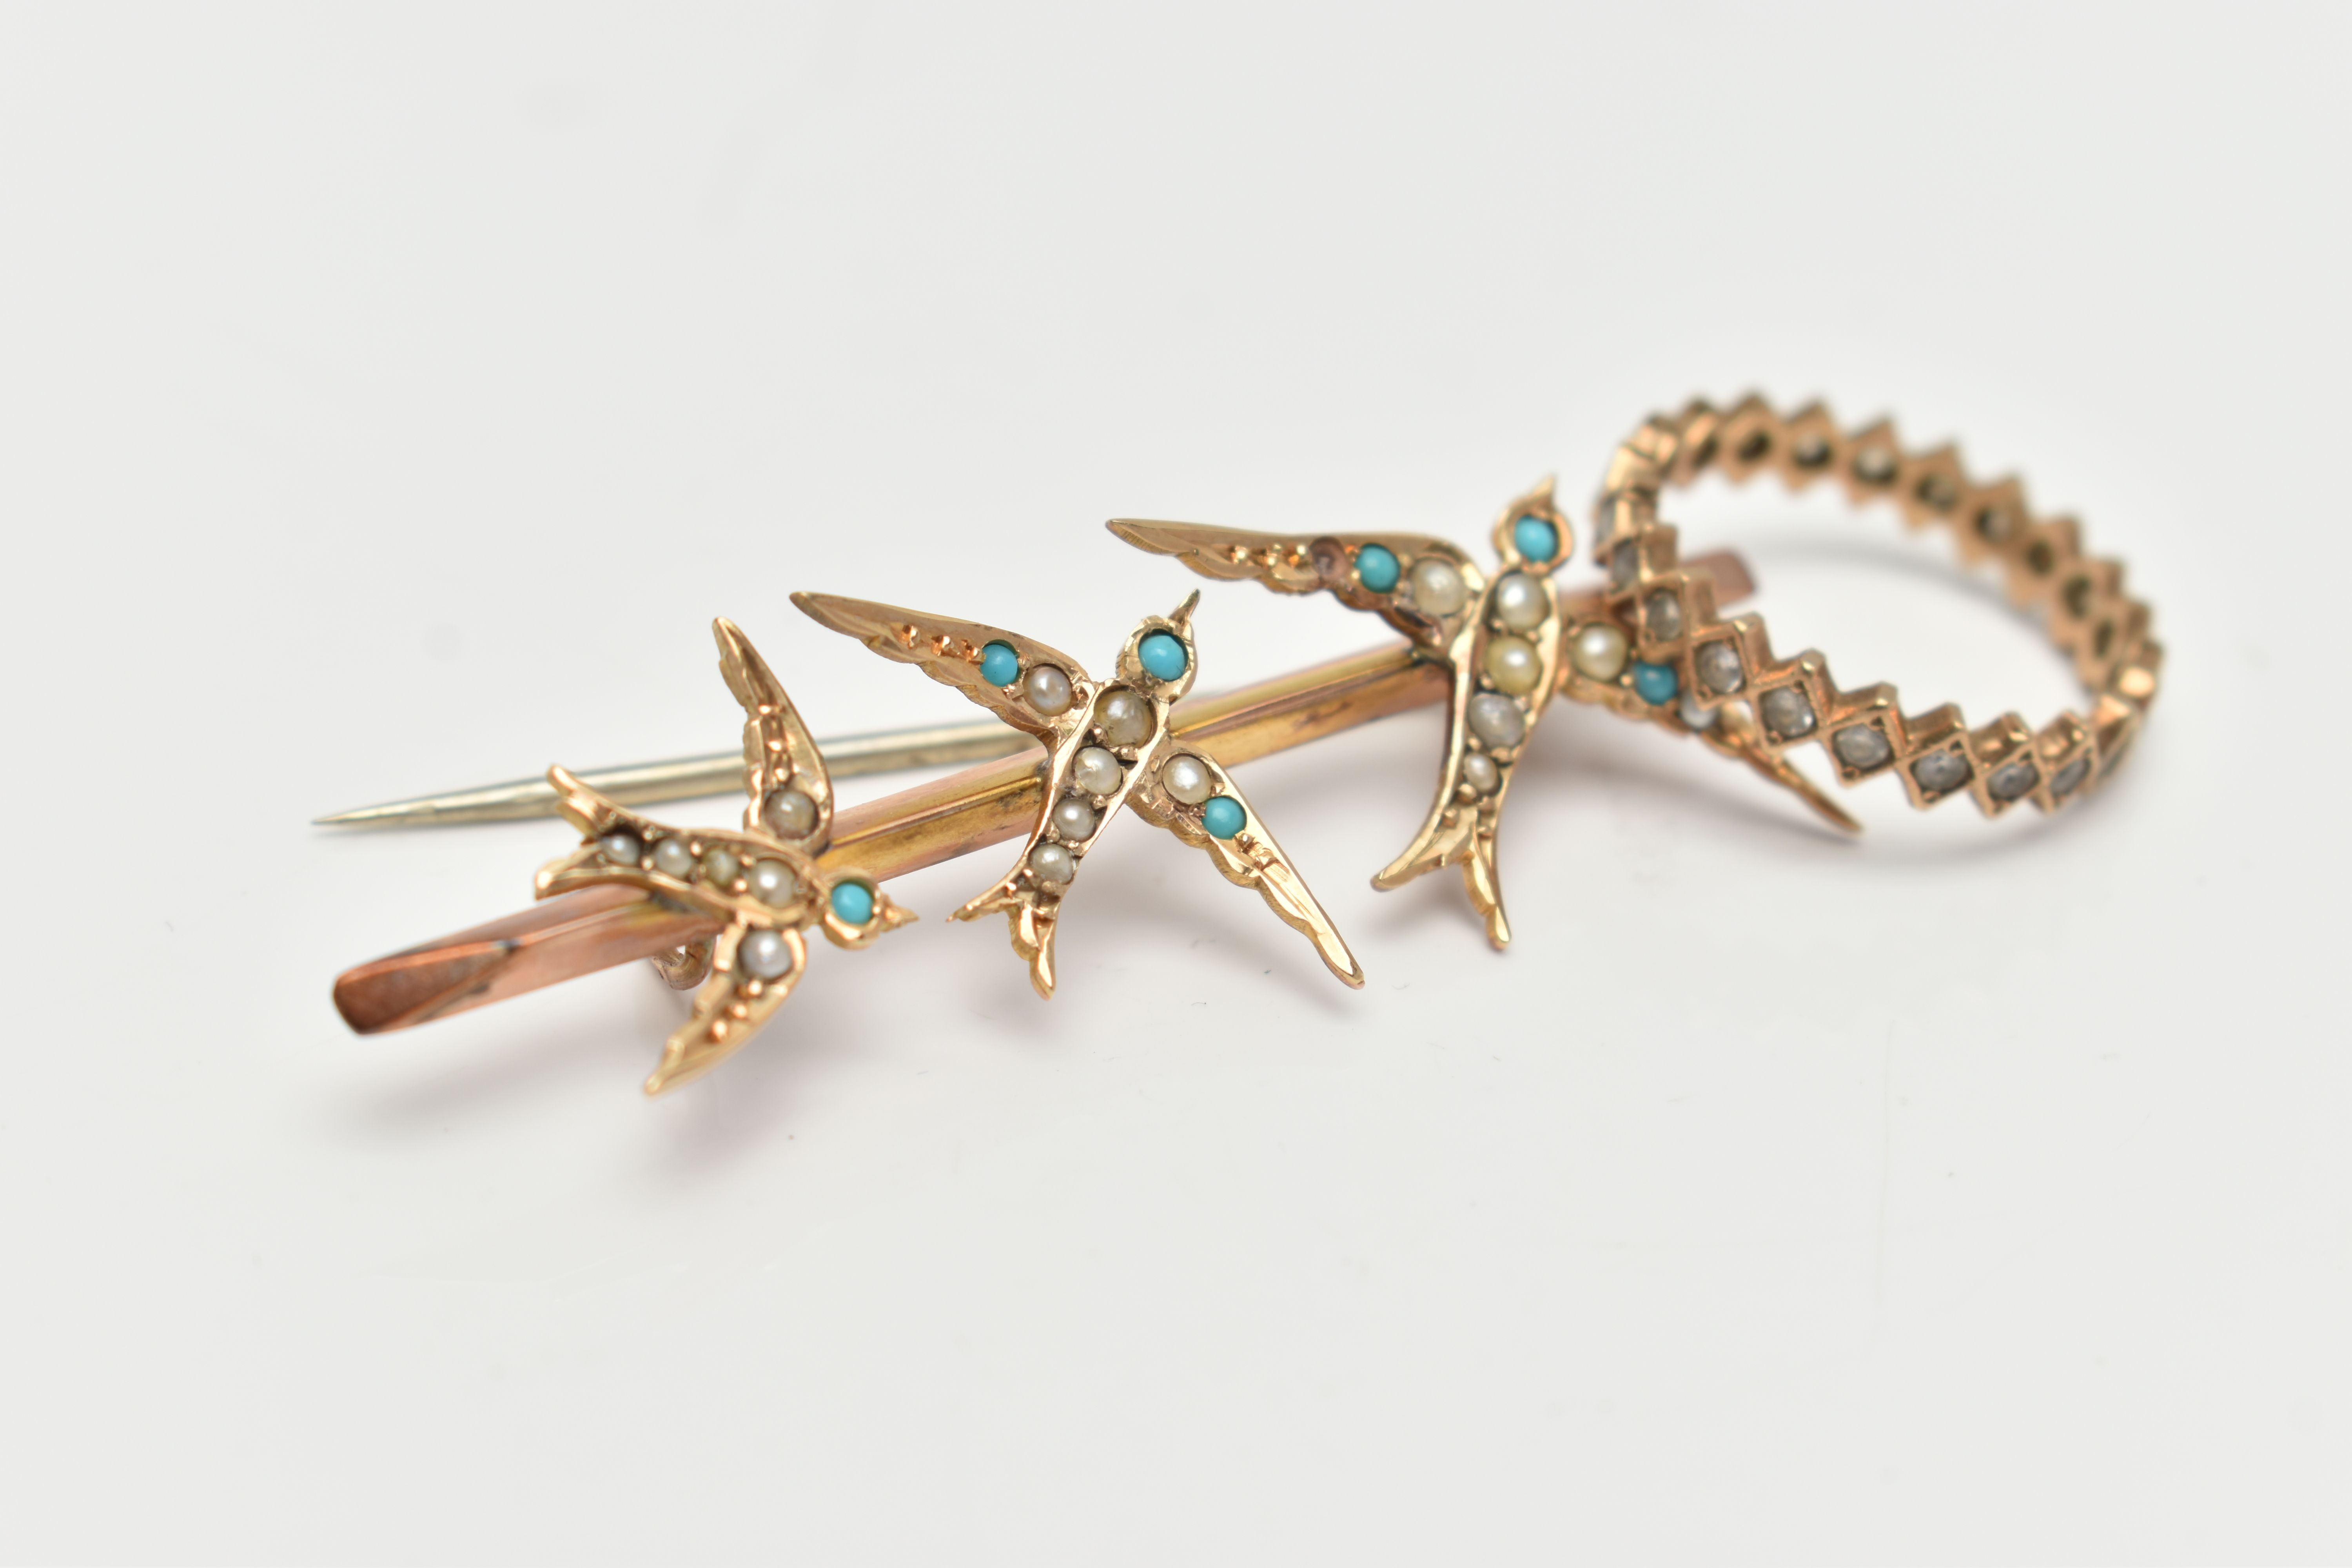 A EARLY 20TH CENTURY 9CT GOLD BROOCH, a yellow gold bar brooch designed with three swallows, set - Image 2 of 4